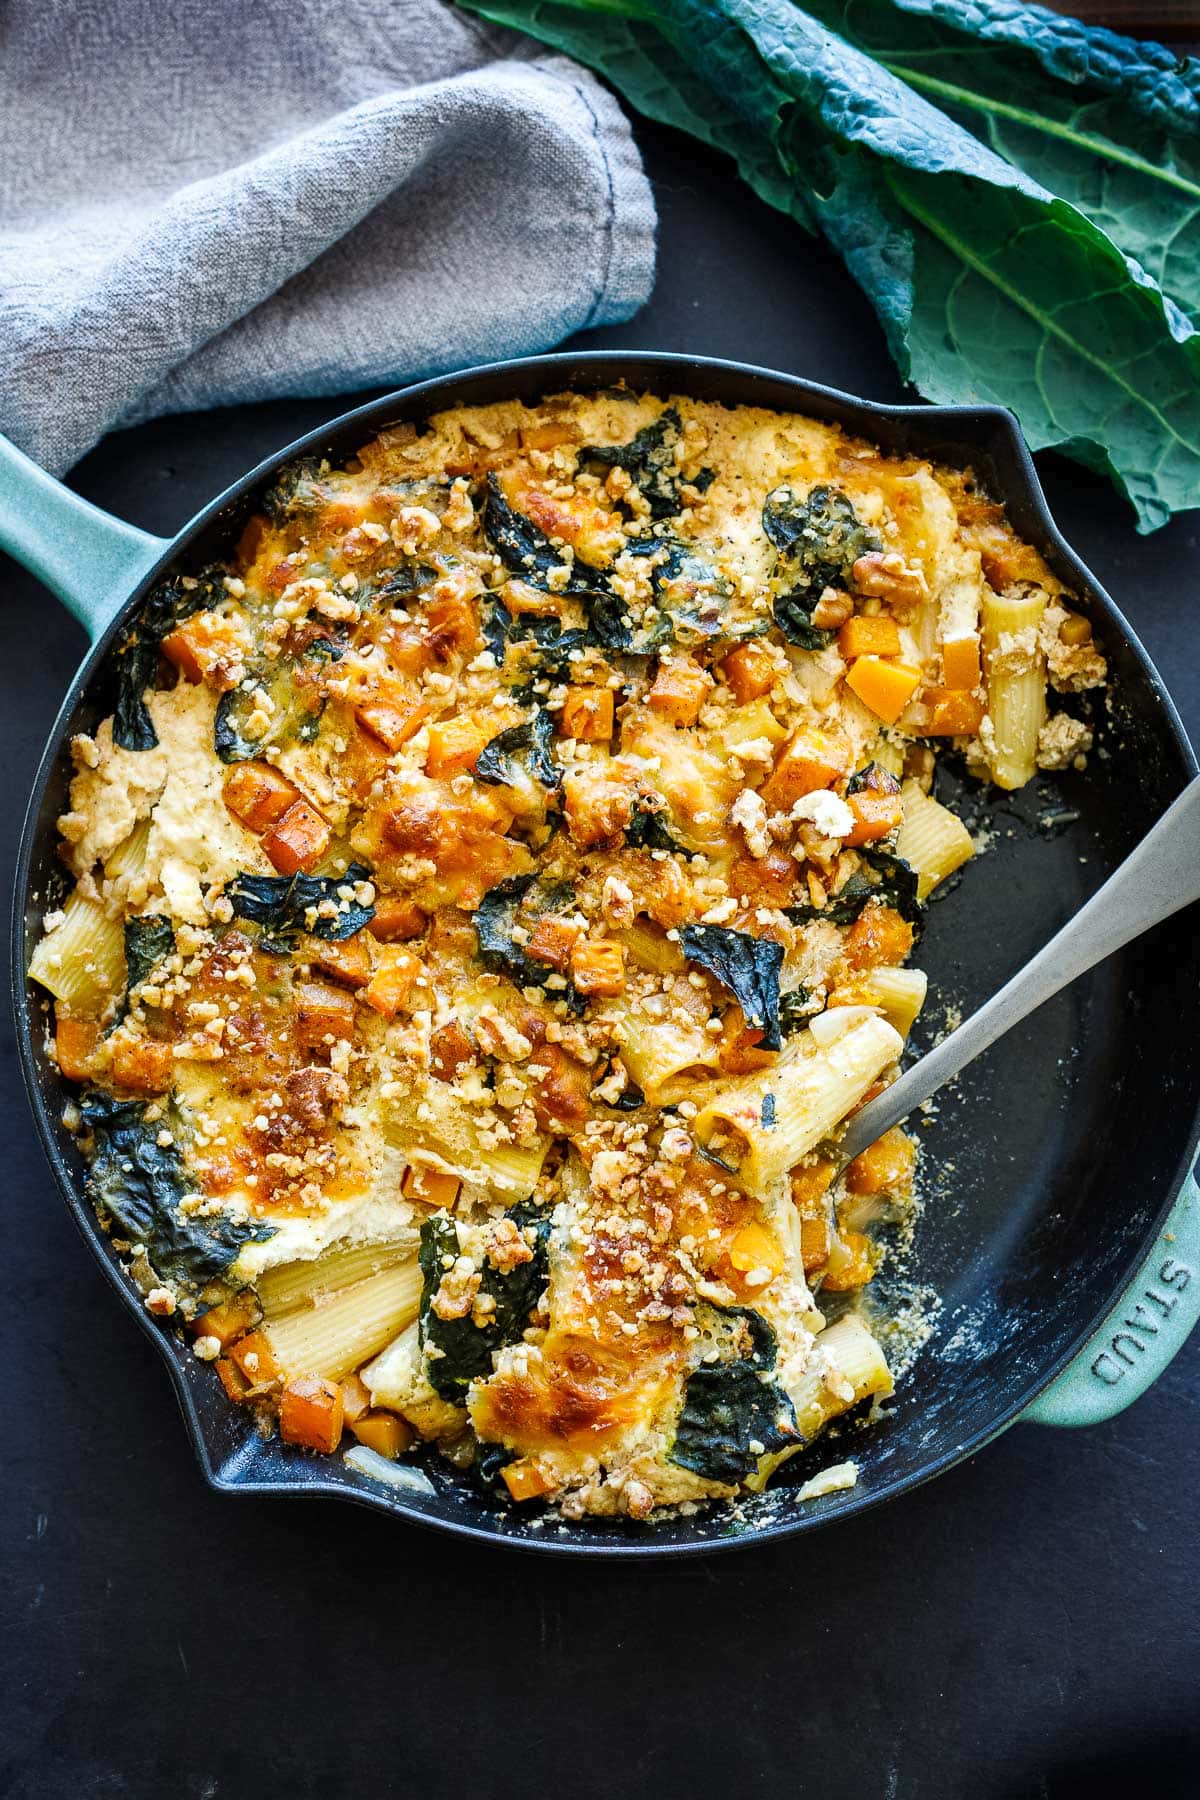 This No-Boil, Baked Rigatoni with Butternut Squash, Kale, Sage and Pecans can be made in one pan, with 30 minutes of hands-on time before baking in the oven. A cozy vegetarian dinner, perfect for fall.